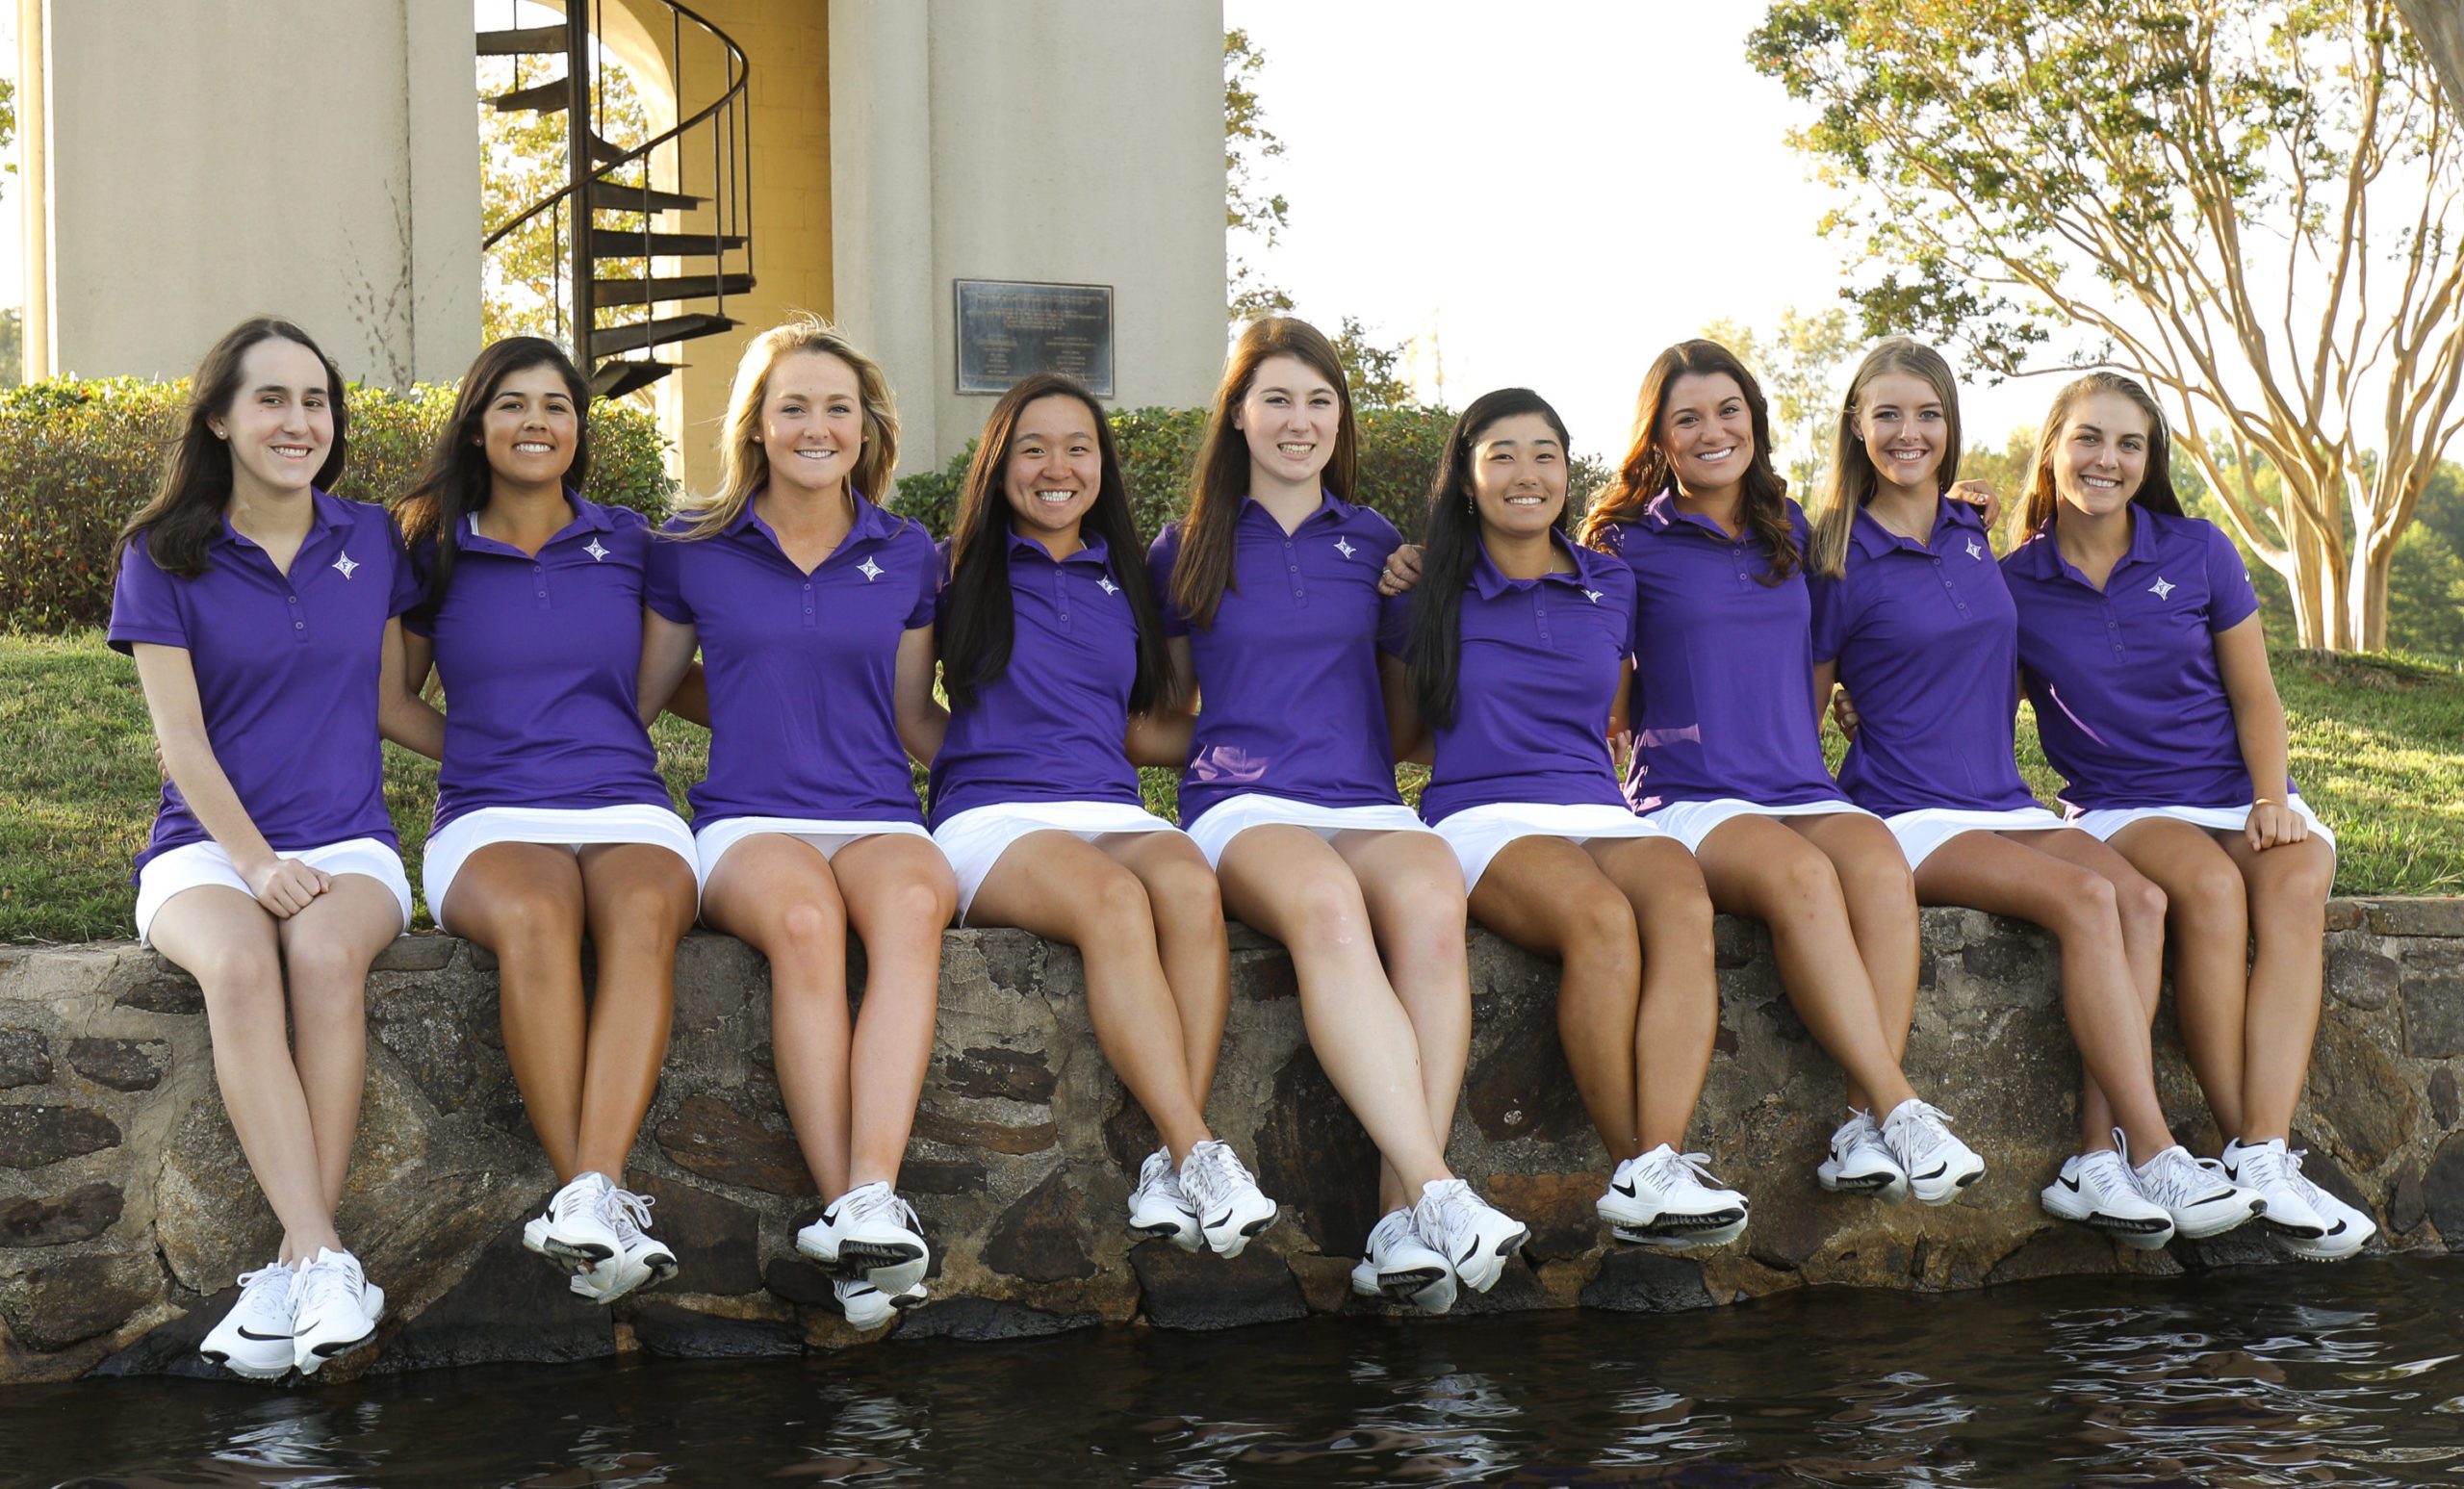 The 2017-18 Furman women's golf team became the 19th in school history to qualify for the NCAA Women's Golf Championship.